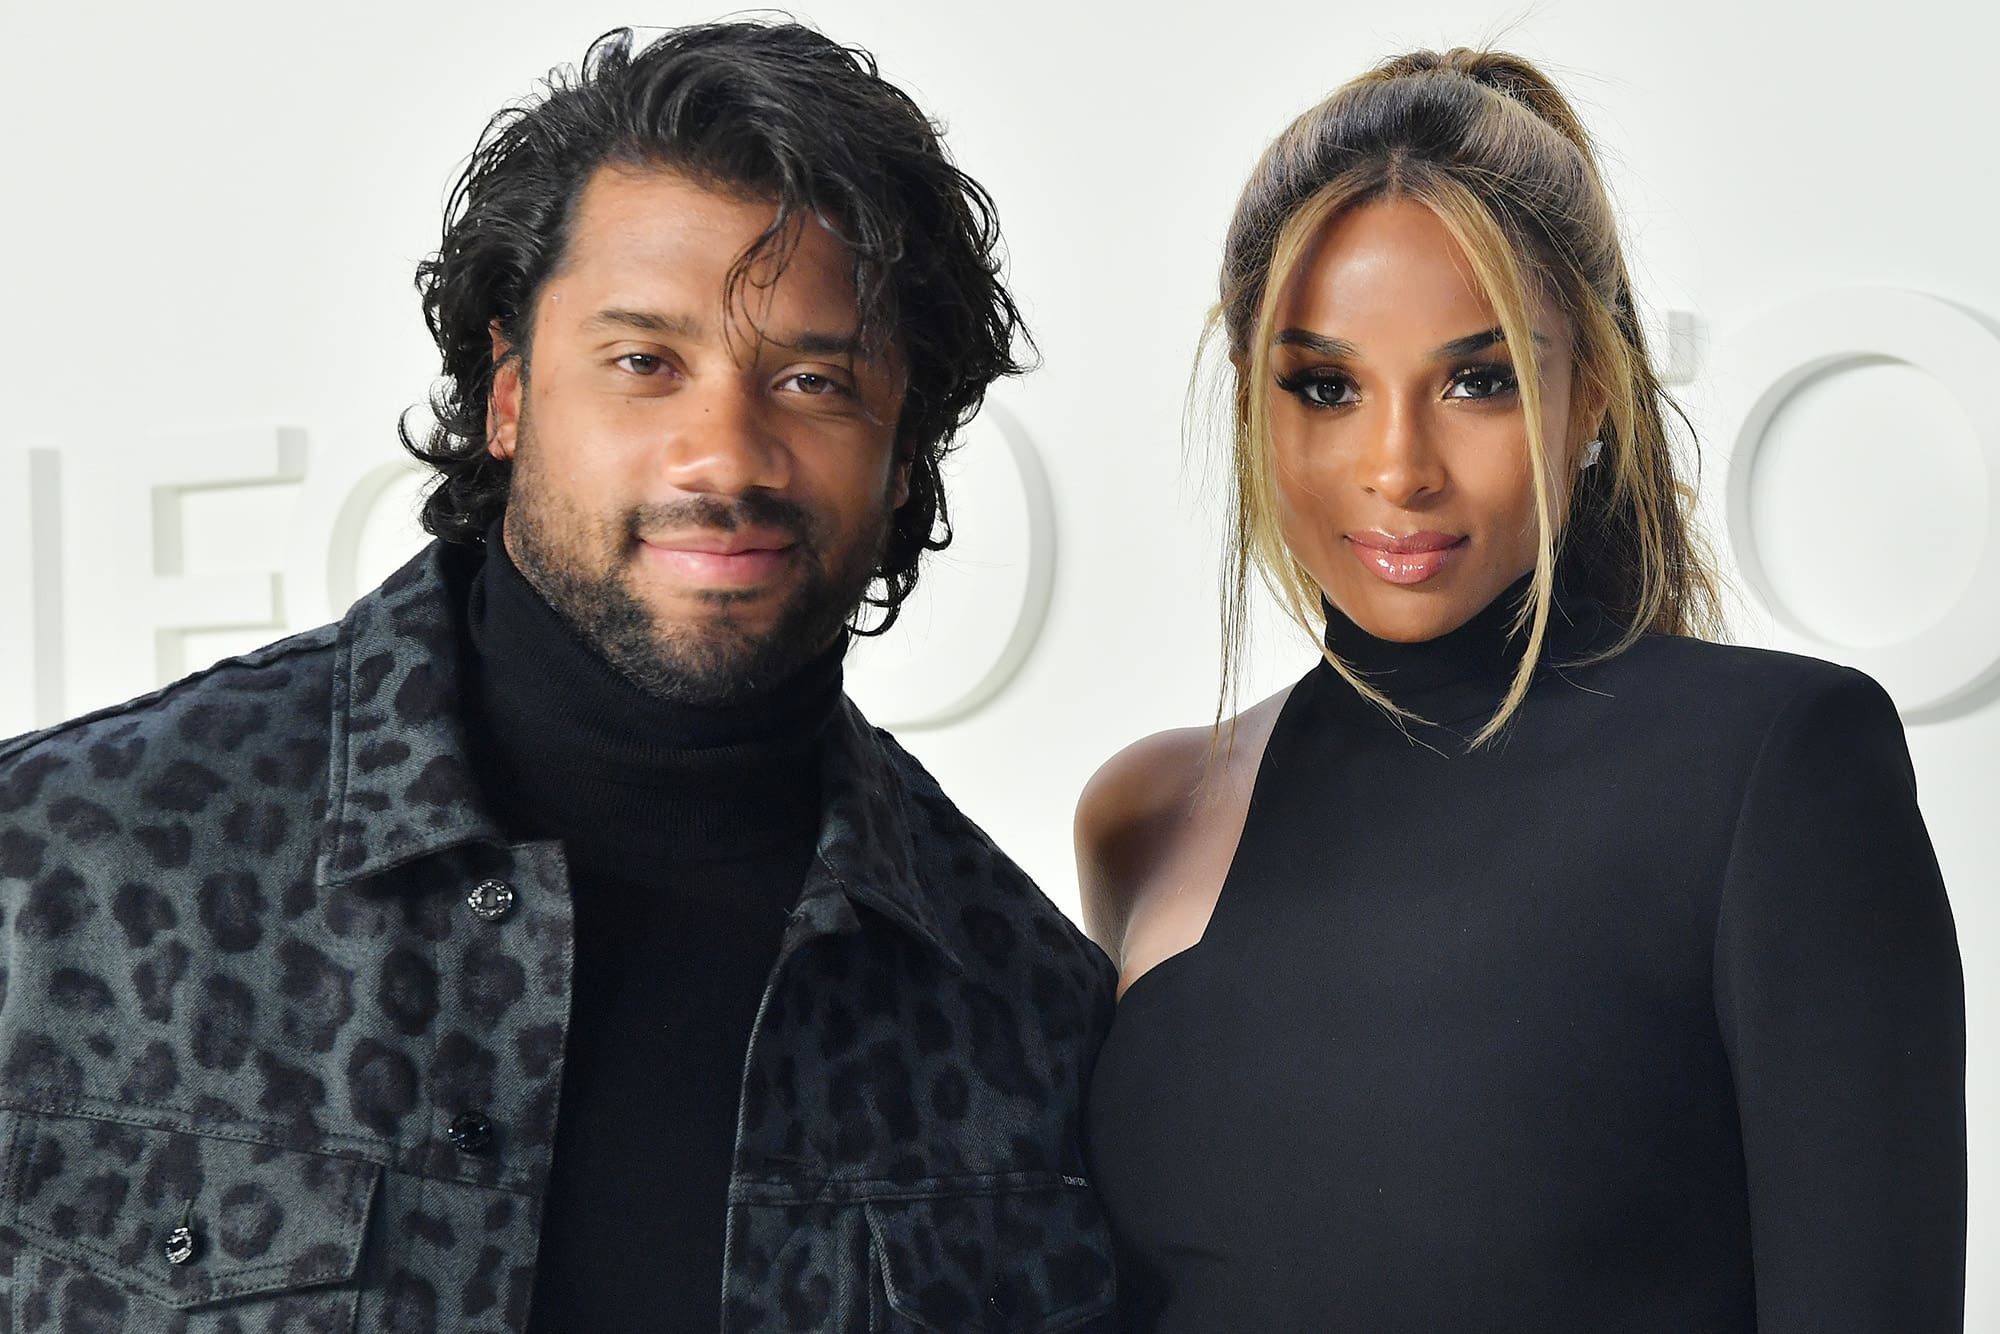 ”ciara-publicly-professes-her-love-for-russell-wilson”